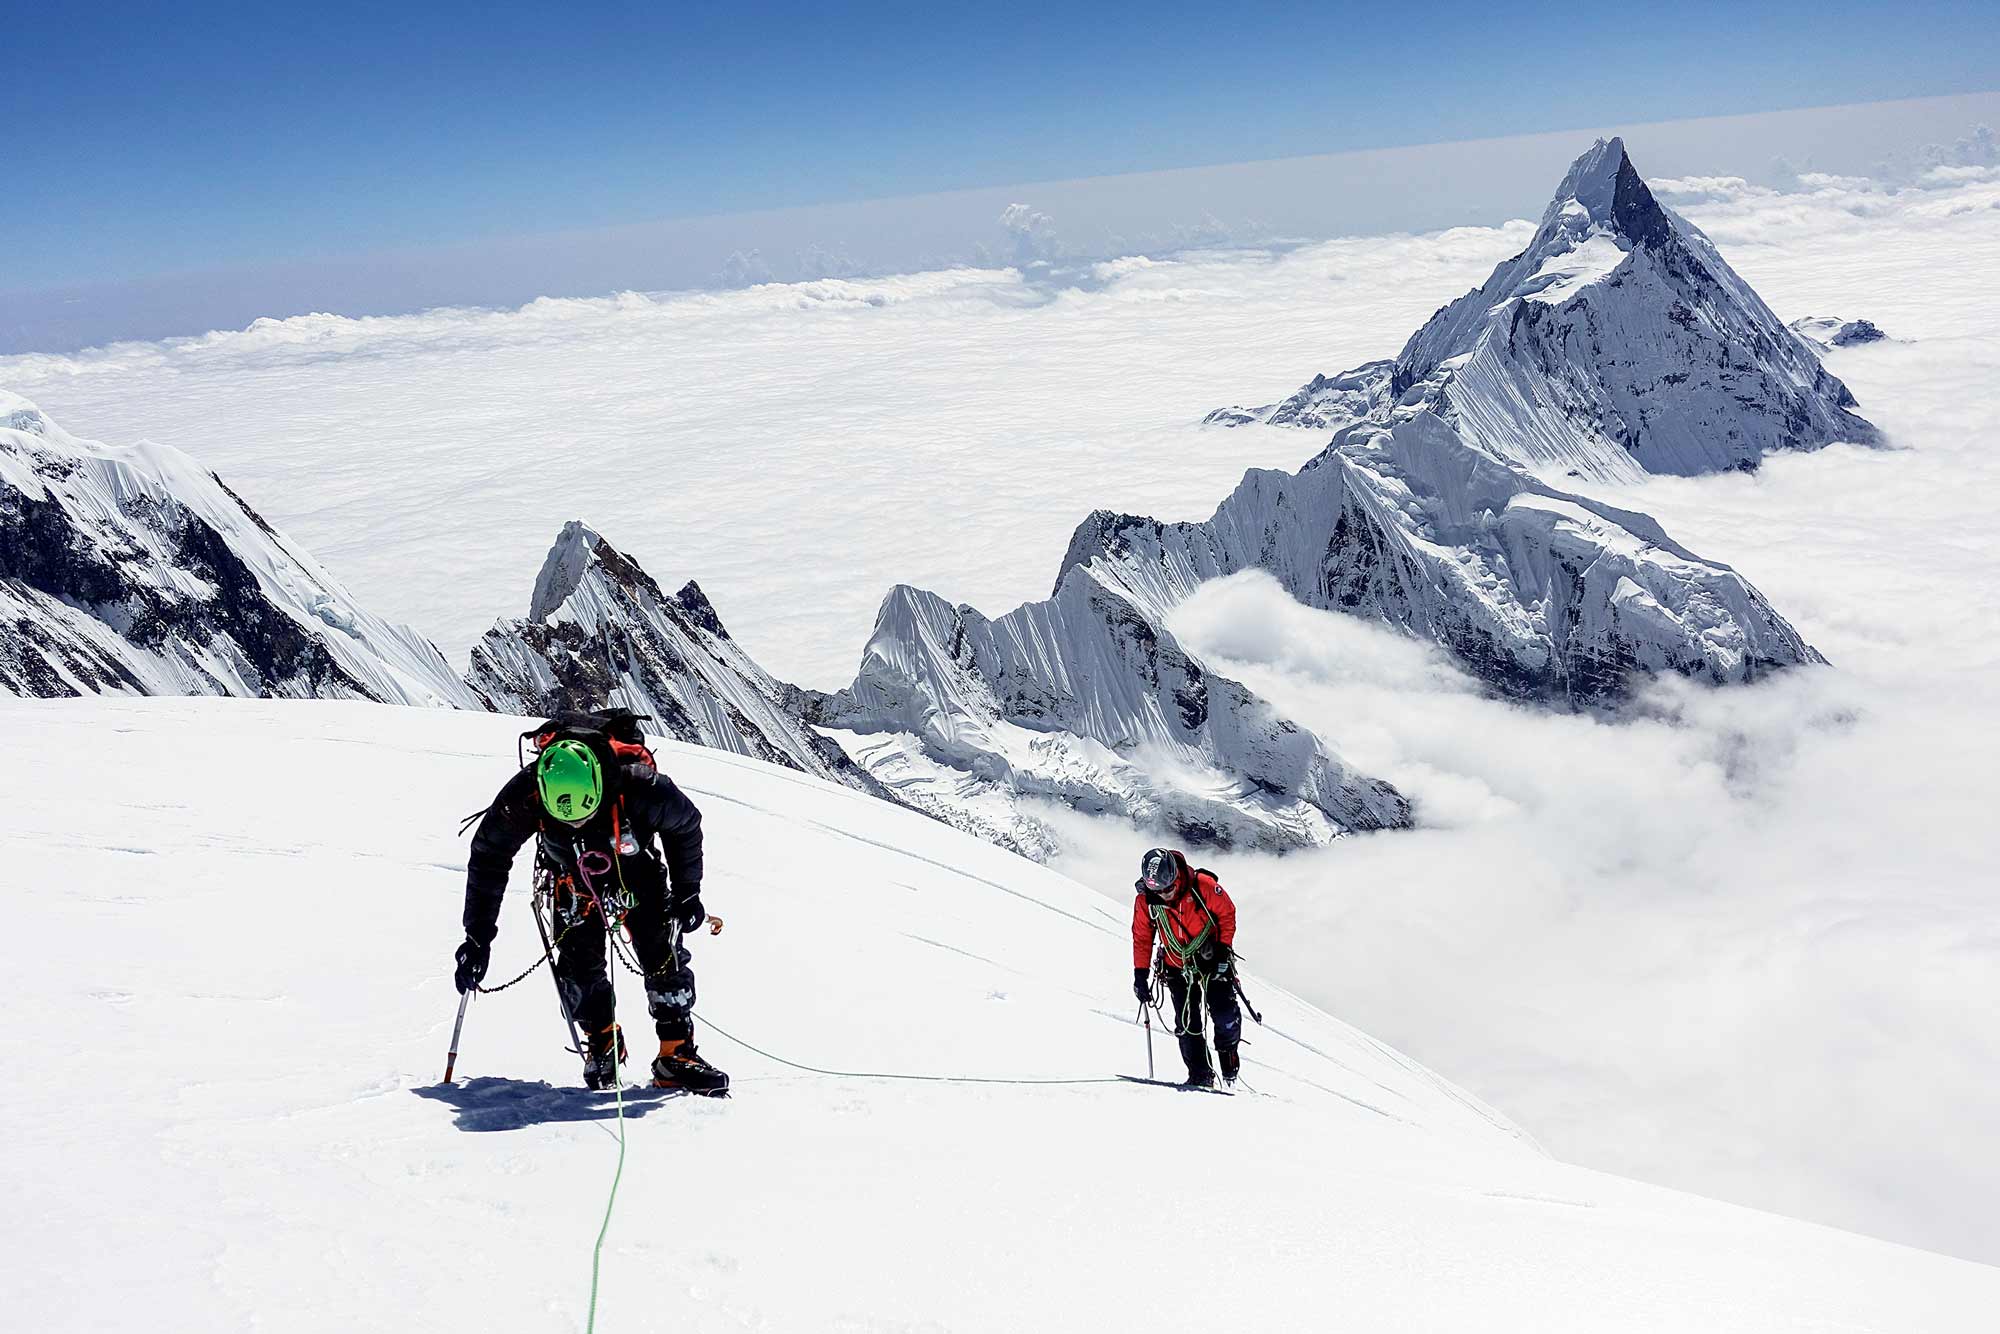 Park Joung-yong and Choi Suk-mun below the summit of Gangapurna (7455m), Nepal, in October 2016, with Kim Chang-ho. [Photo] Kim Chang-ho, Choi Suk-mun collection